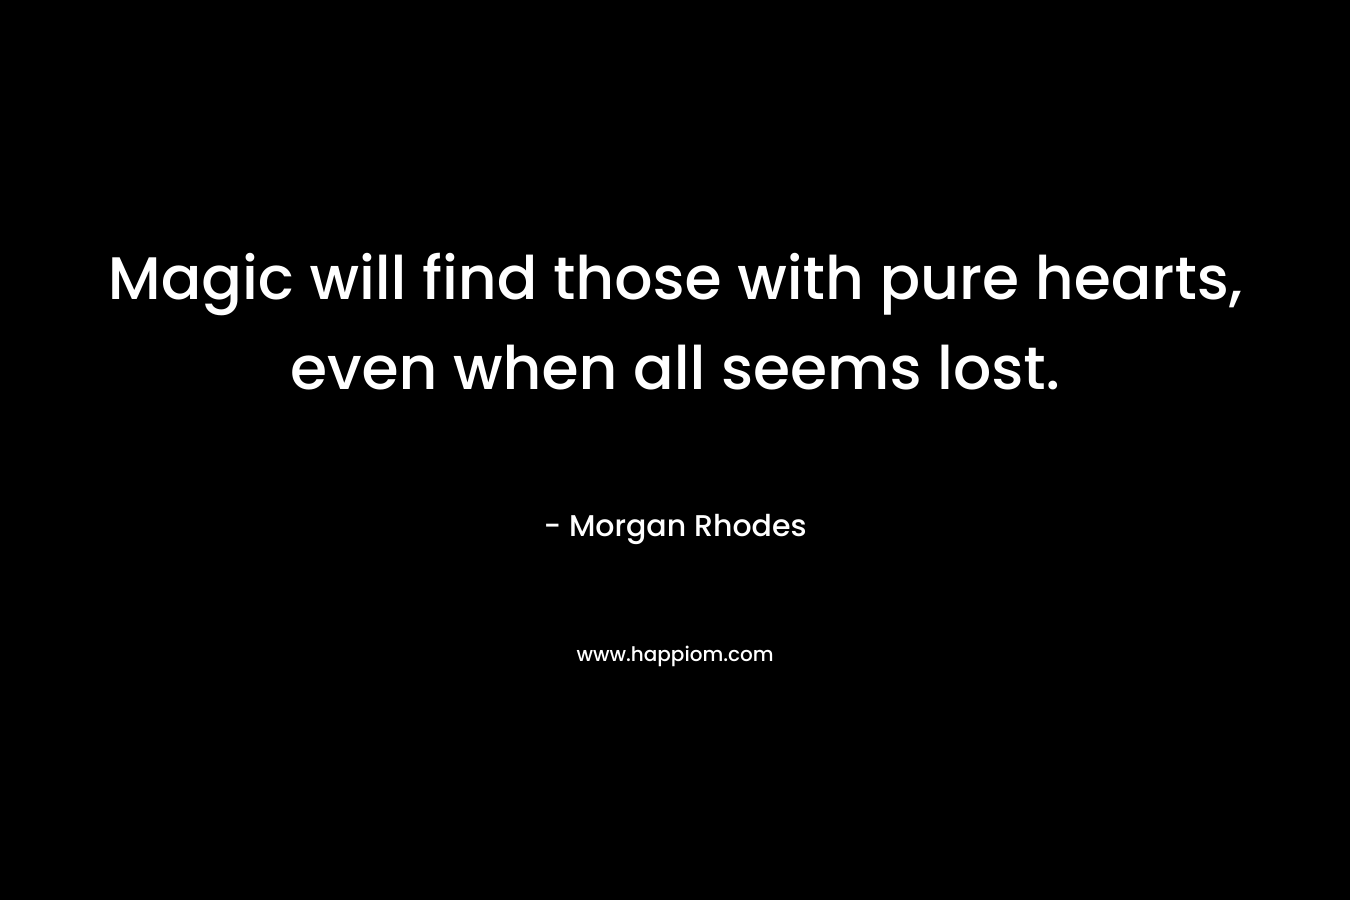 Magic will find those with pure hearts, even when all seems lost. – Morgan Rhodes